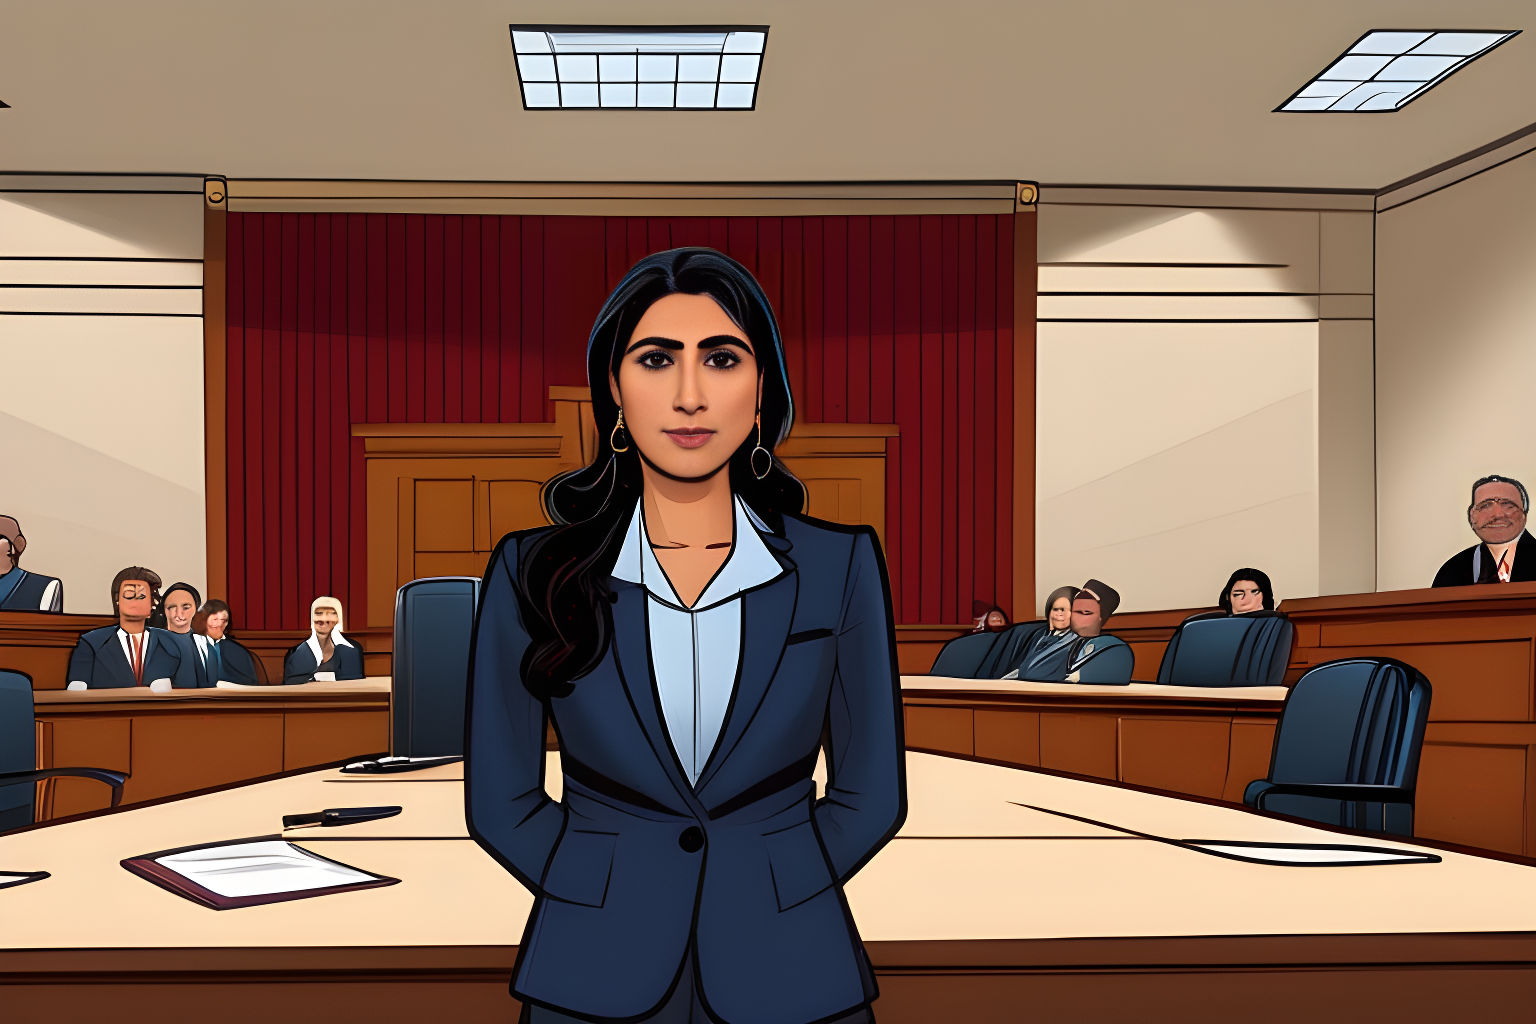 Breathtaking wide-frame shot of the FTC's Lina Khan in a full court room.